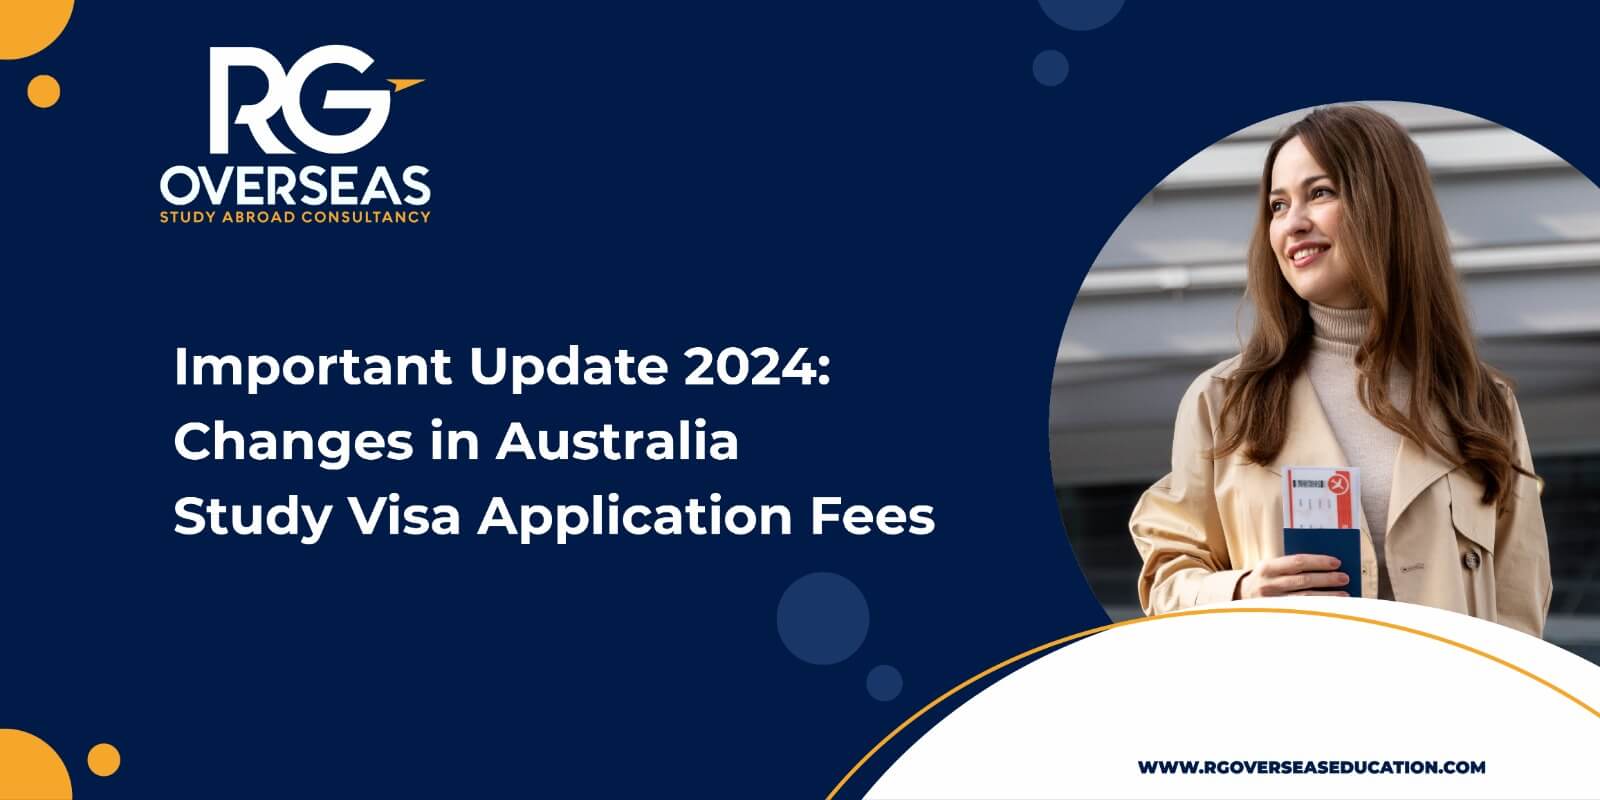 Important Update 2024: Changes in Australia Study Visa Application Fees